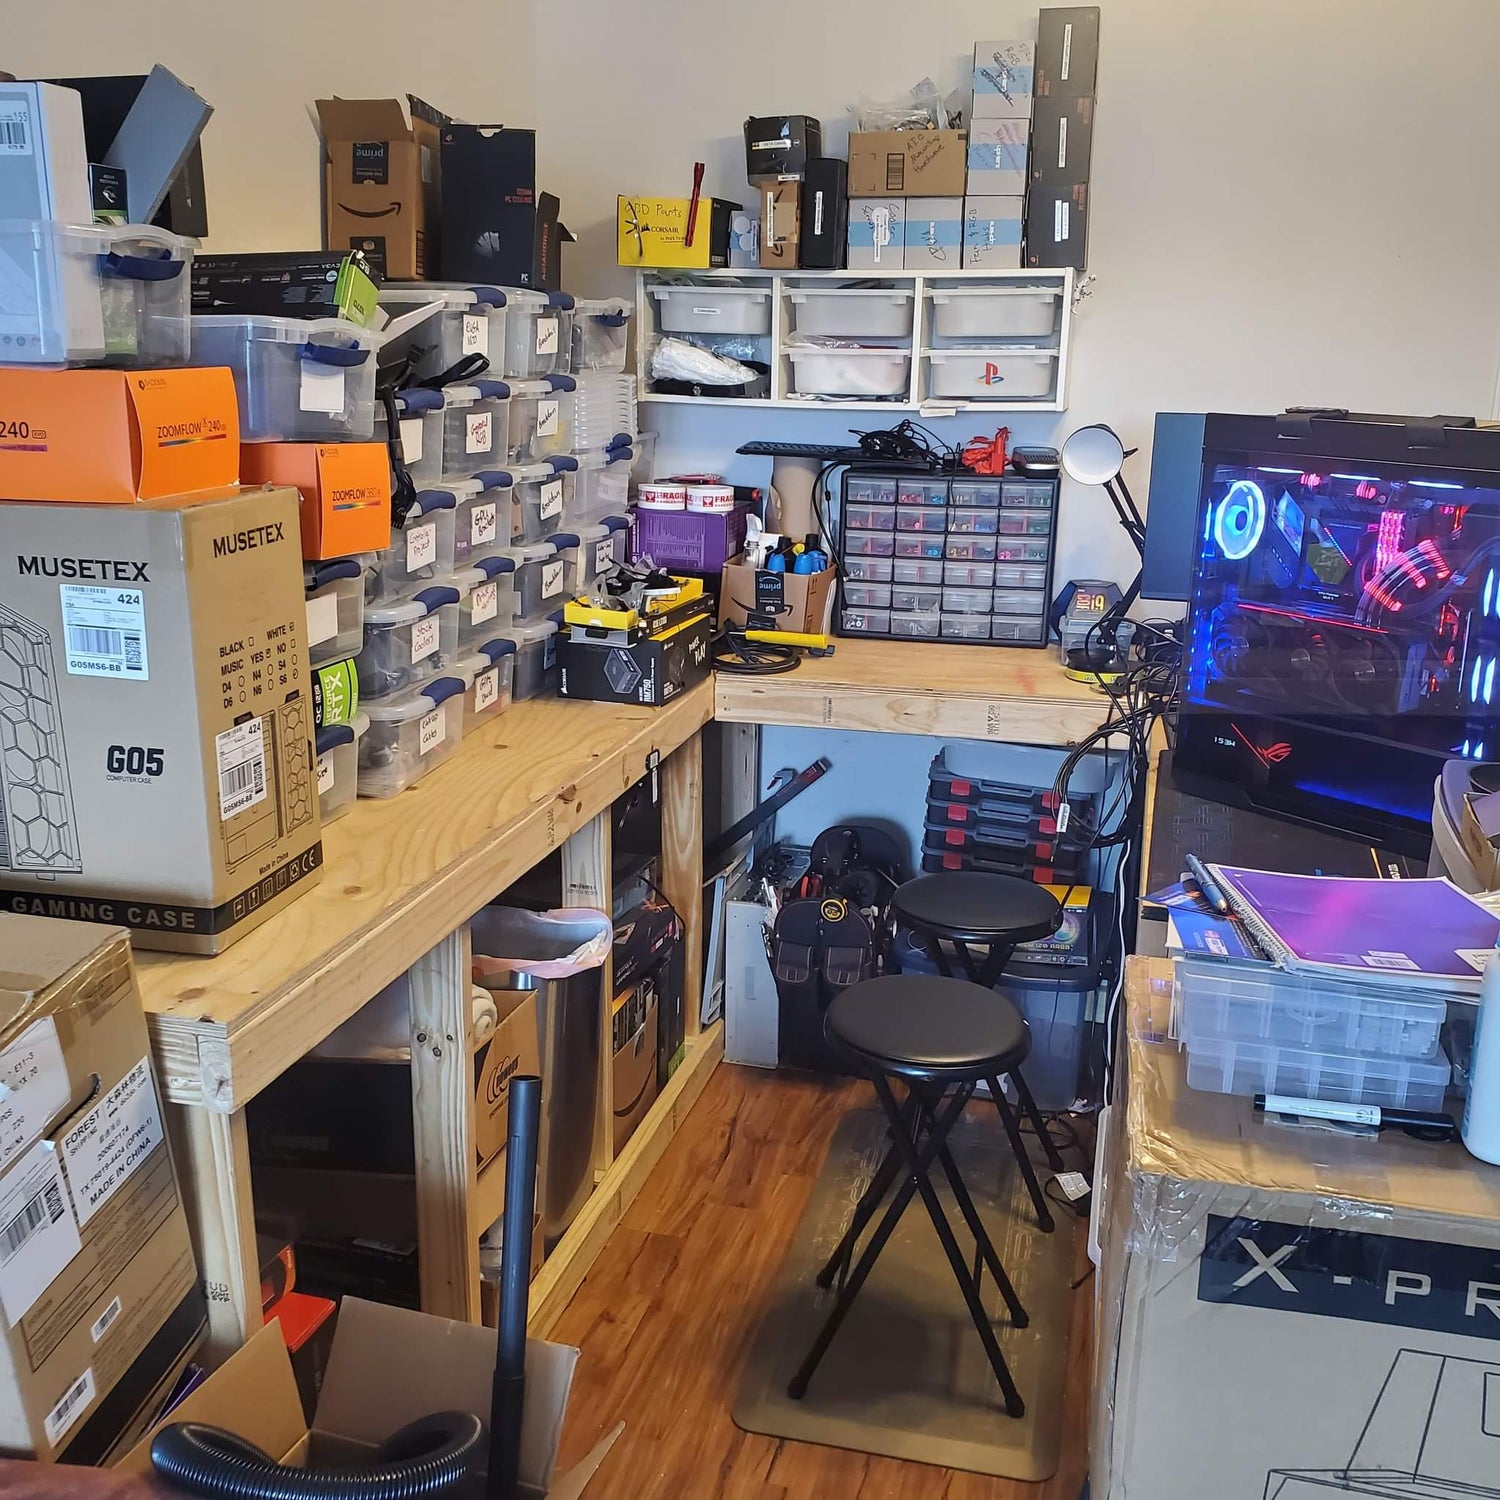 A photo capturing the essence of the early workspace - the transformation from a kitchen to a professional PC building service.